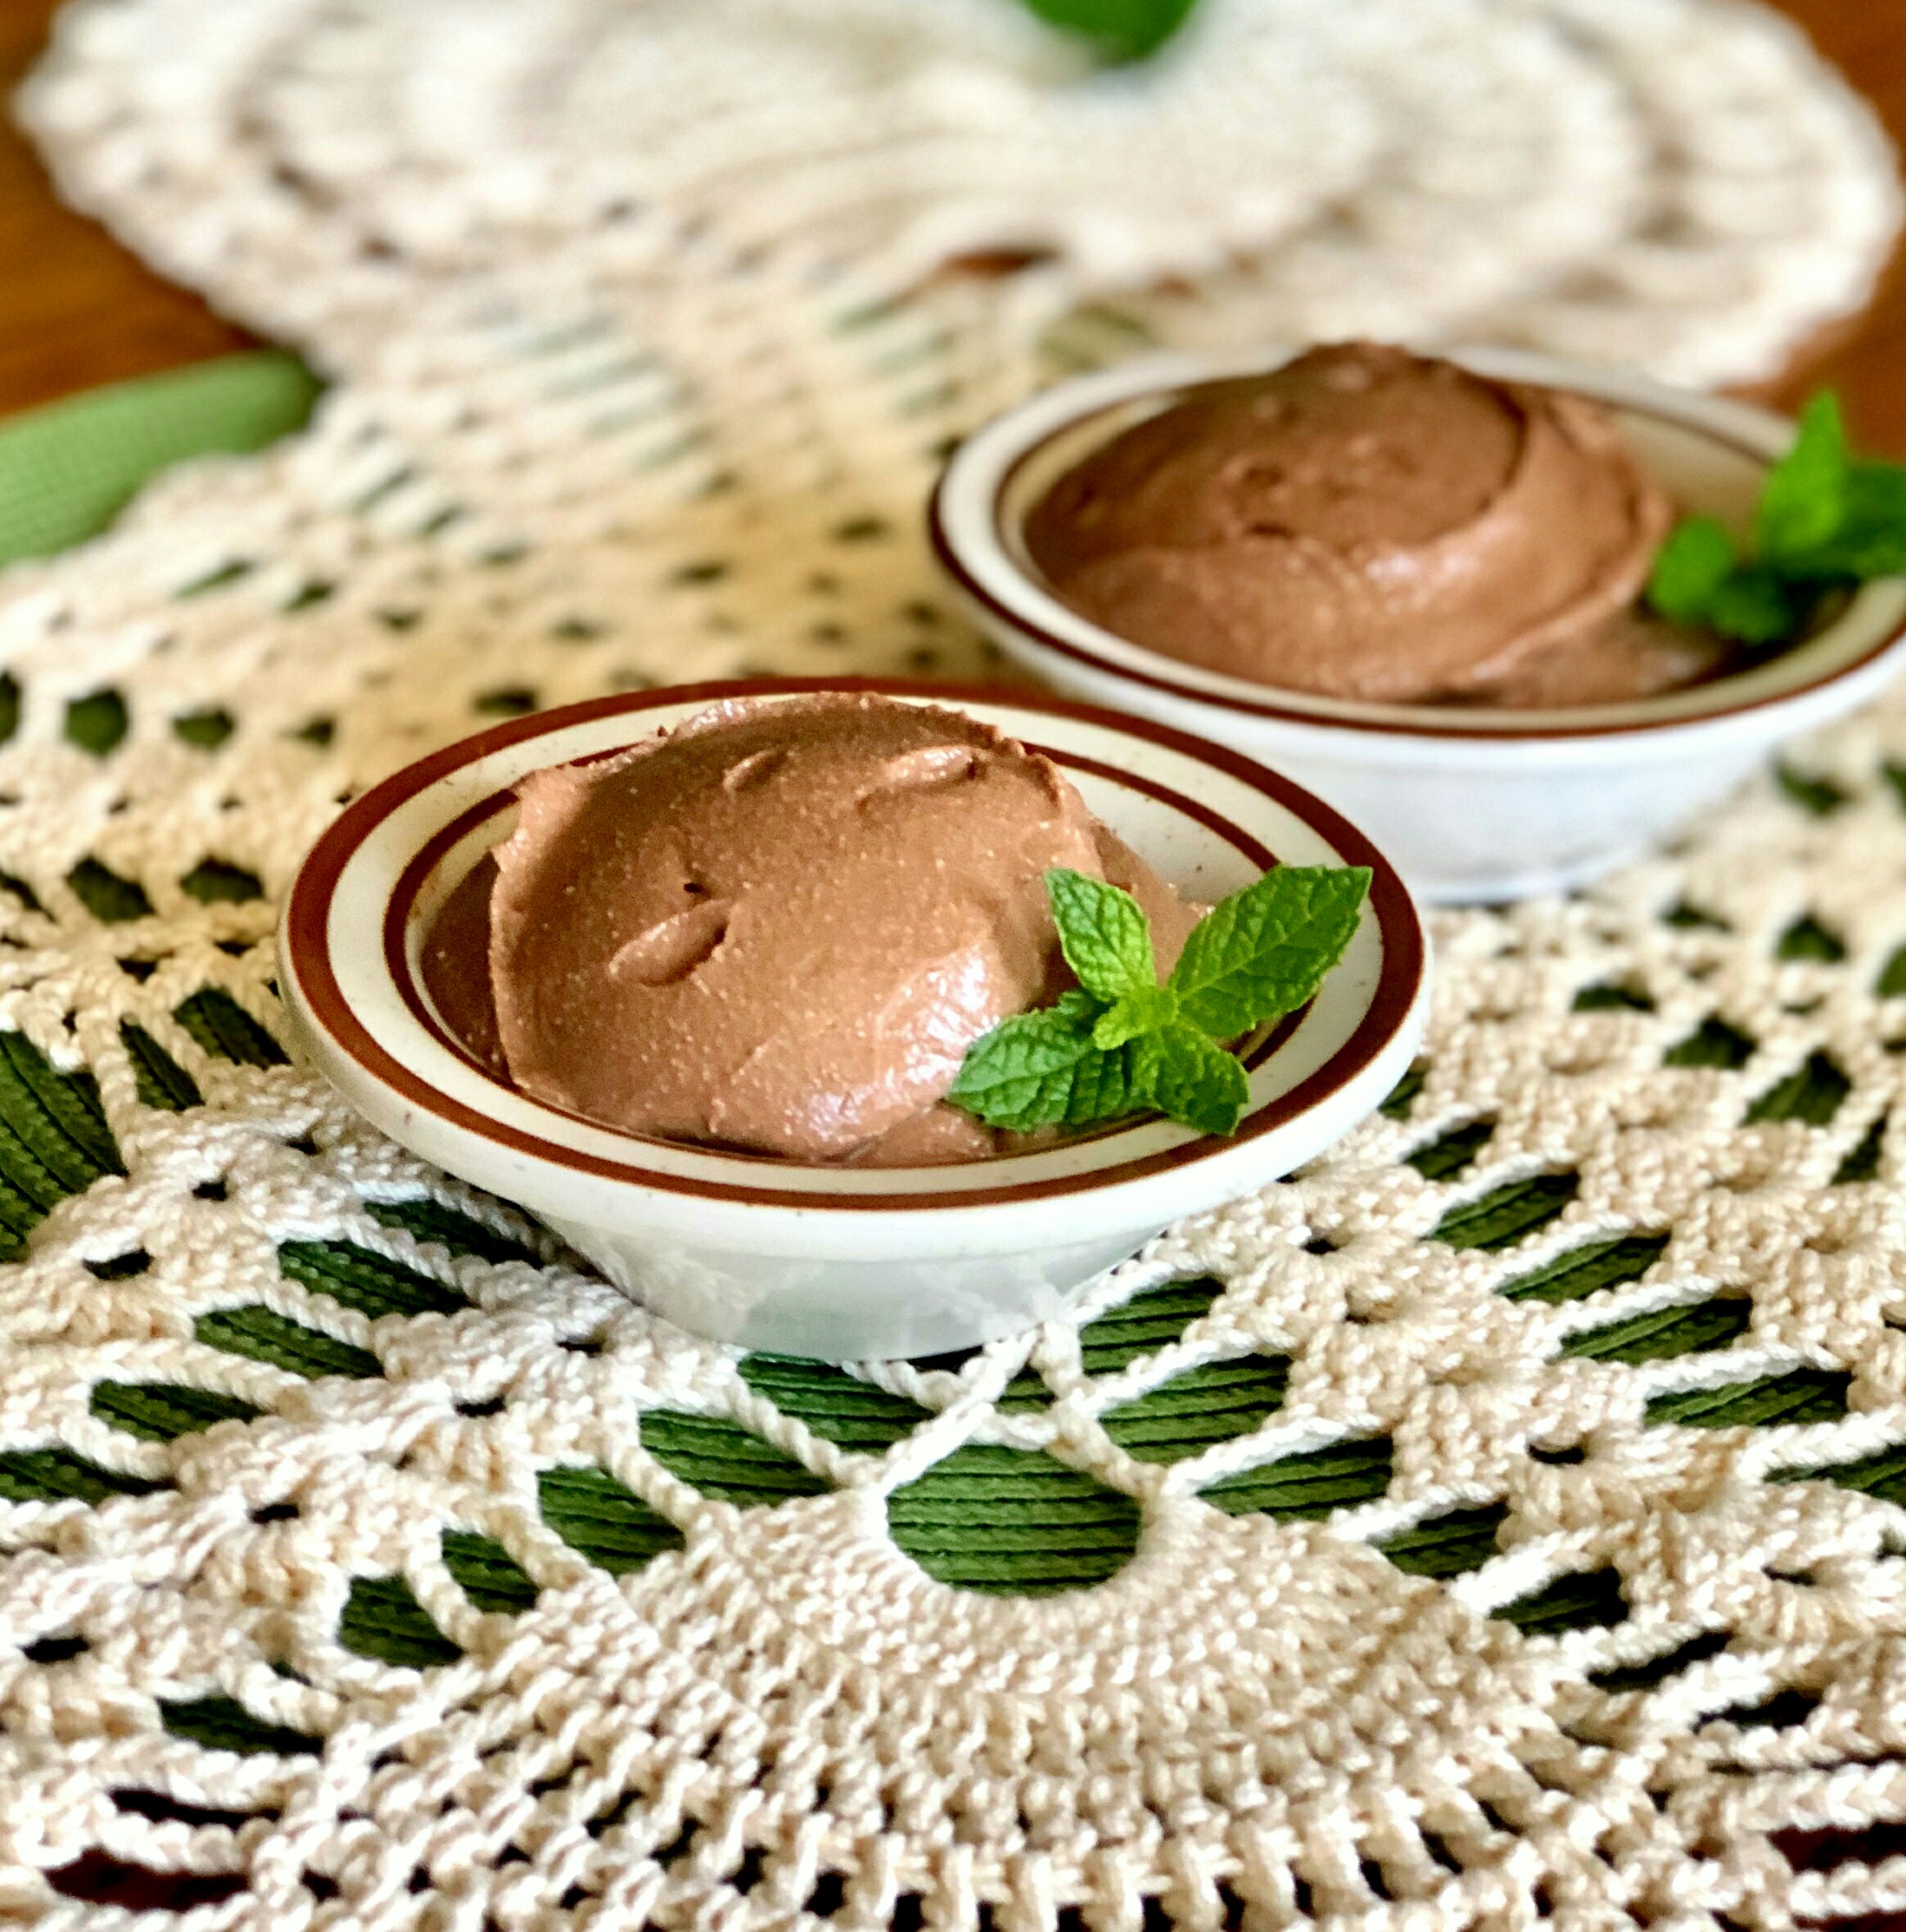 Whipped Peanut Butter-Chocolate Ricotta Pudding